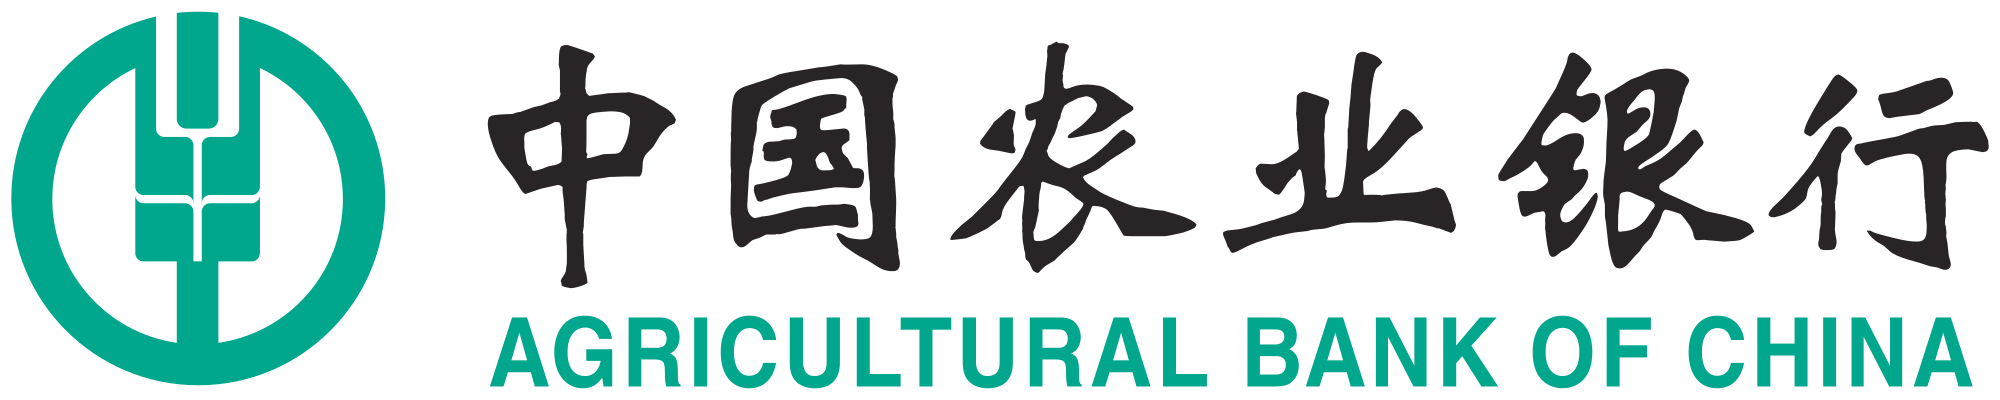 Agricultural Bank of China Logo Background PNG Image